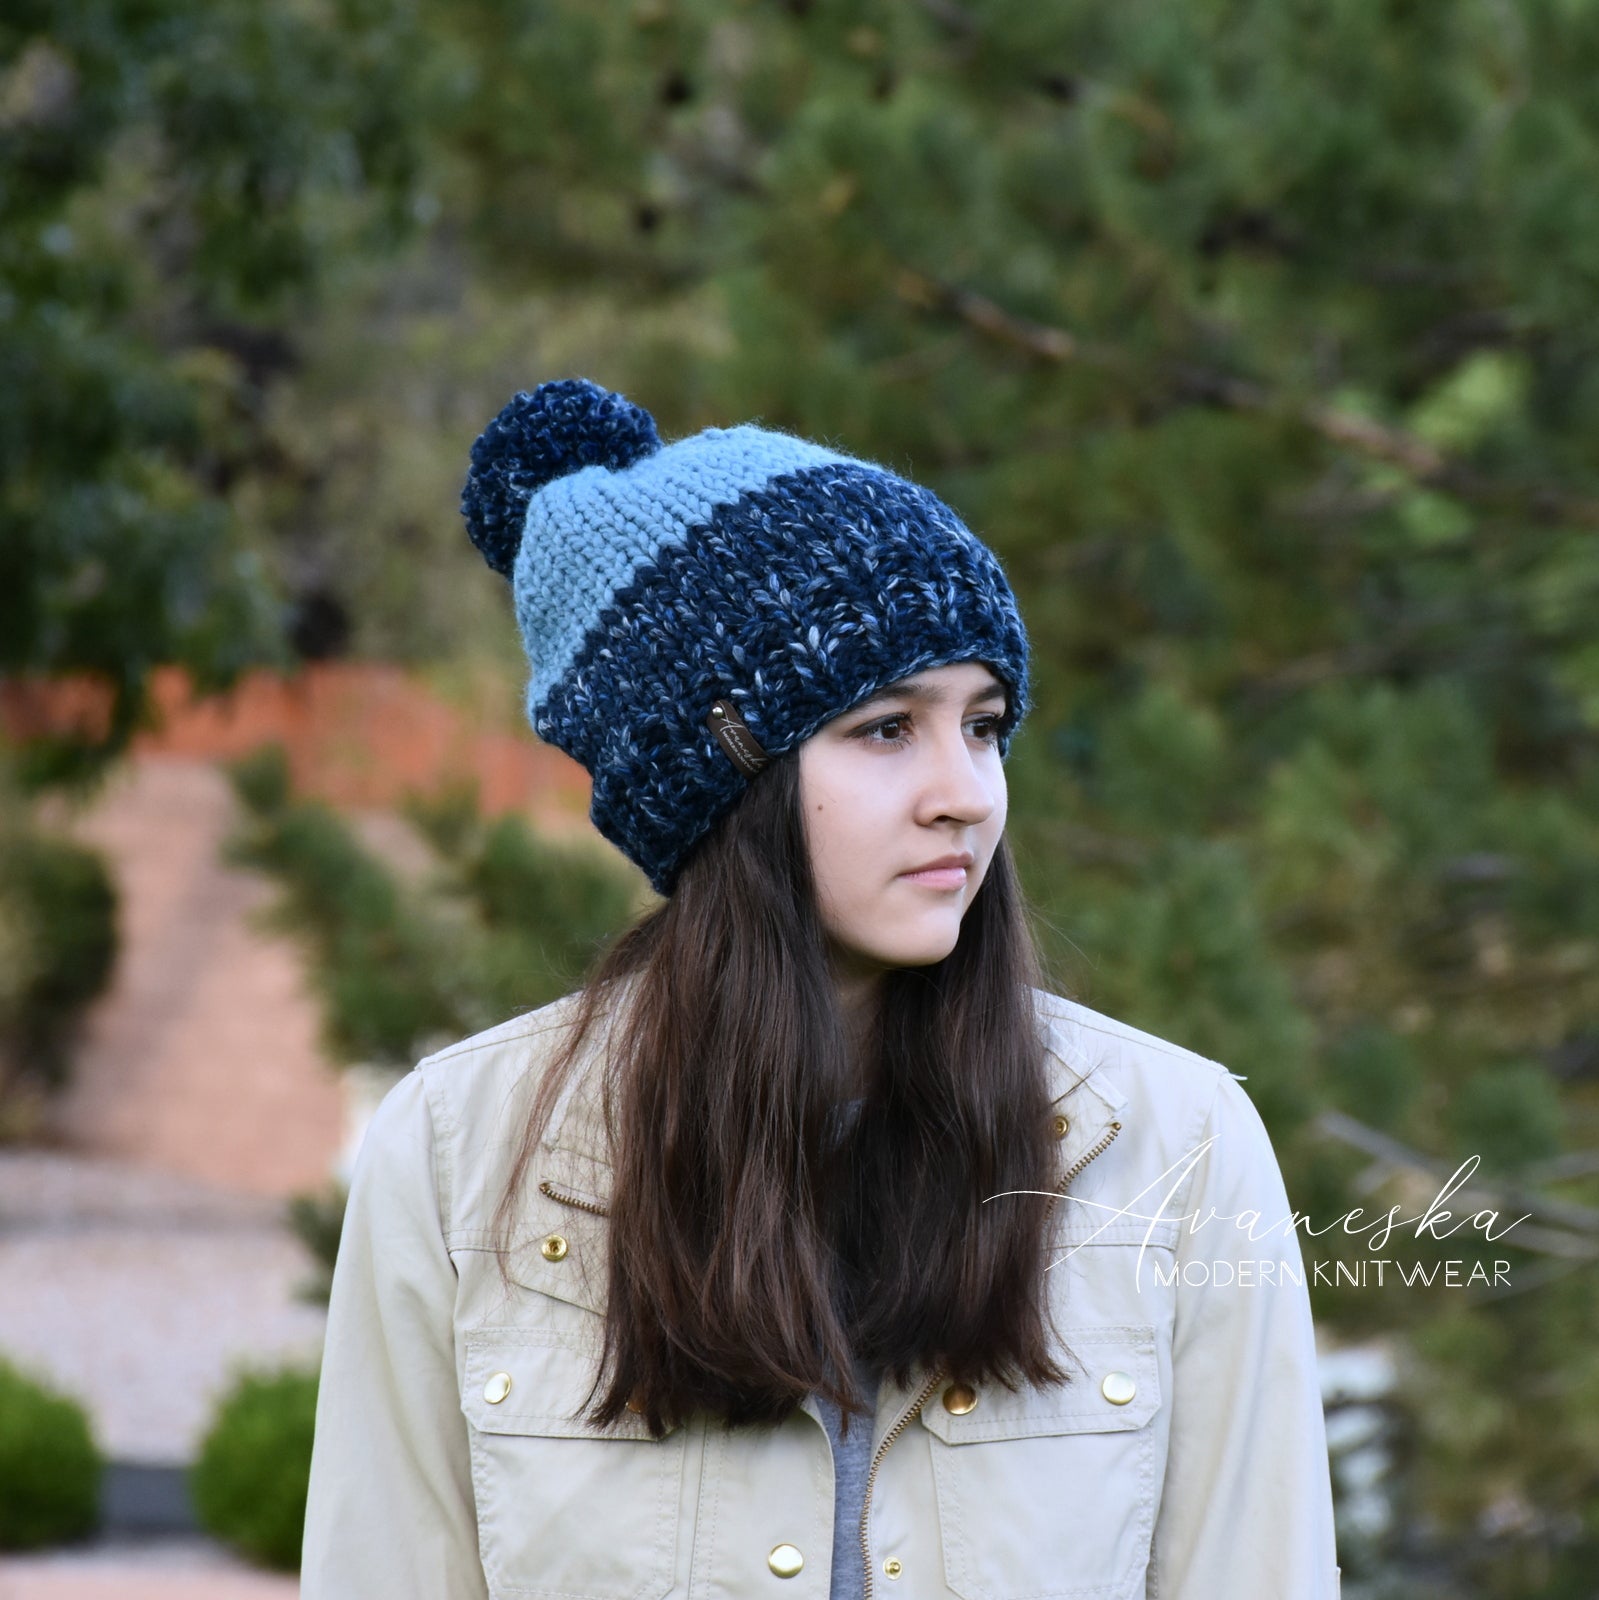 Variegated Knit Tunic + Slouchy Hat = FABULOUSNESS! – Anita by Design